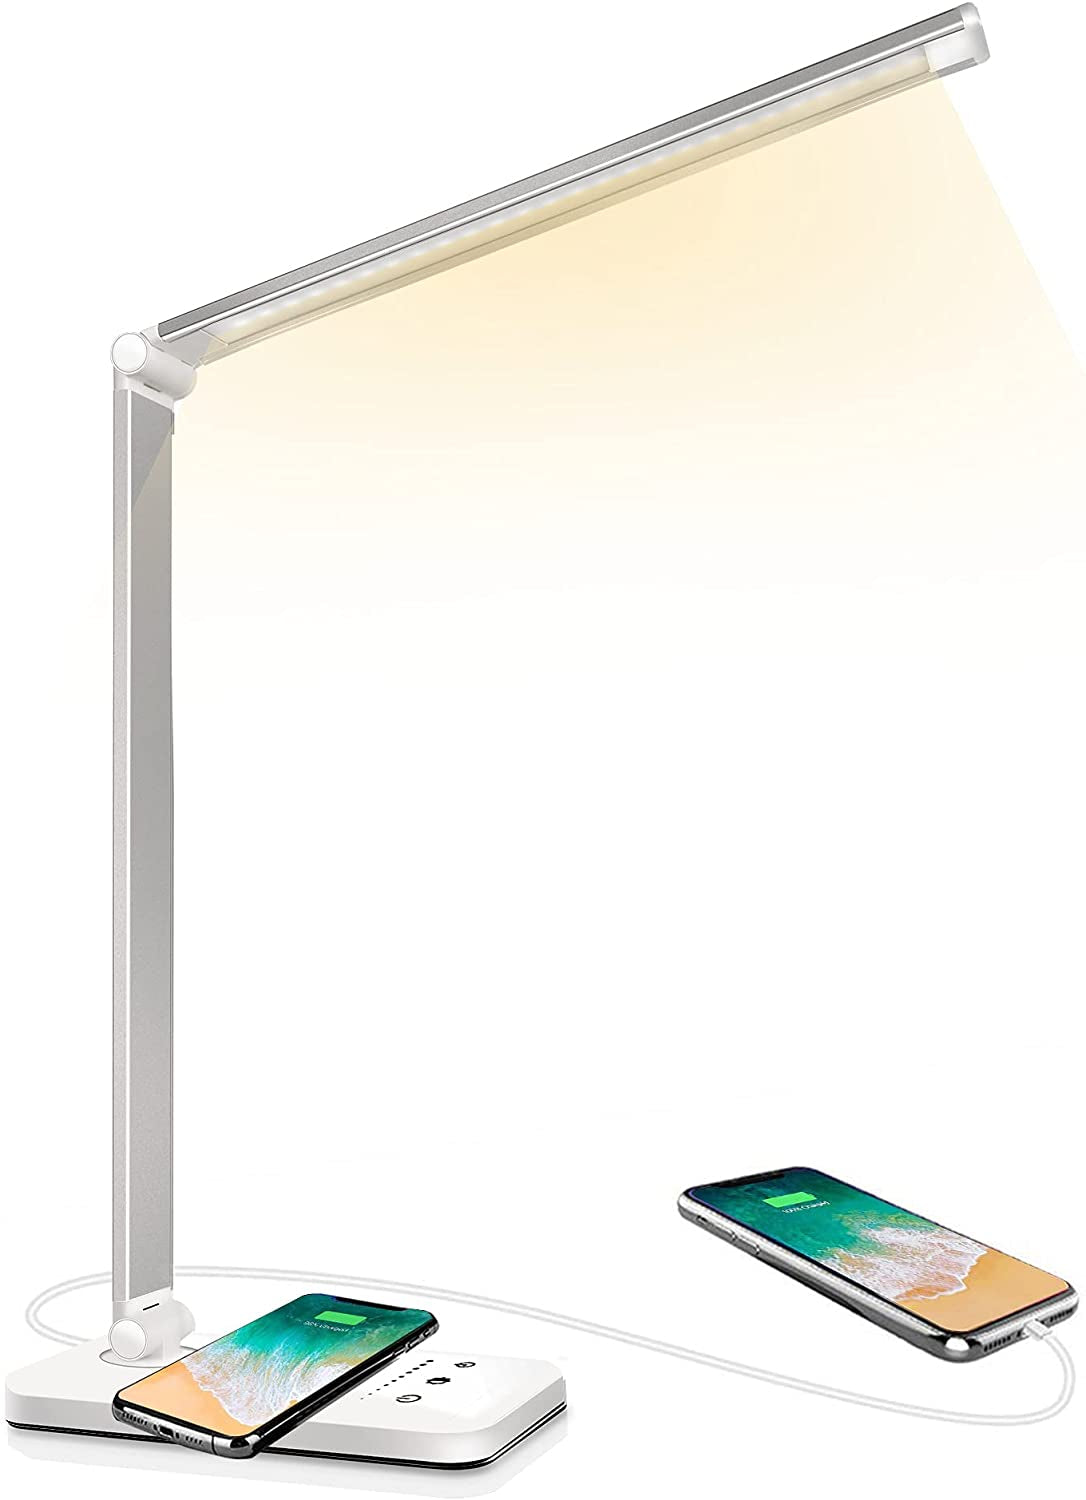 LED Desk Lamp with Wireless Charger, USB Charging Port, Lighting 10 Brightness Level, 5 Modes, Reading Light for Home, Office , Touch Control, Auto Timer Lamps, Silver